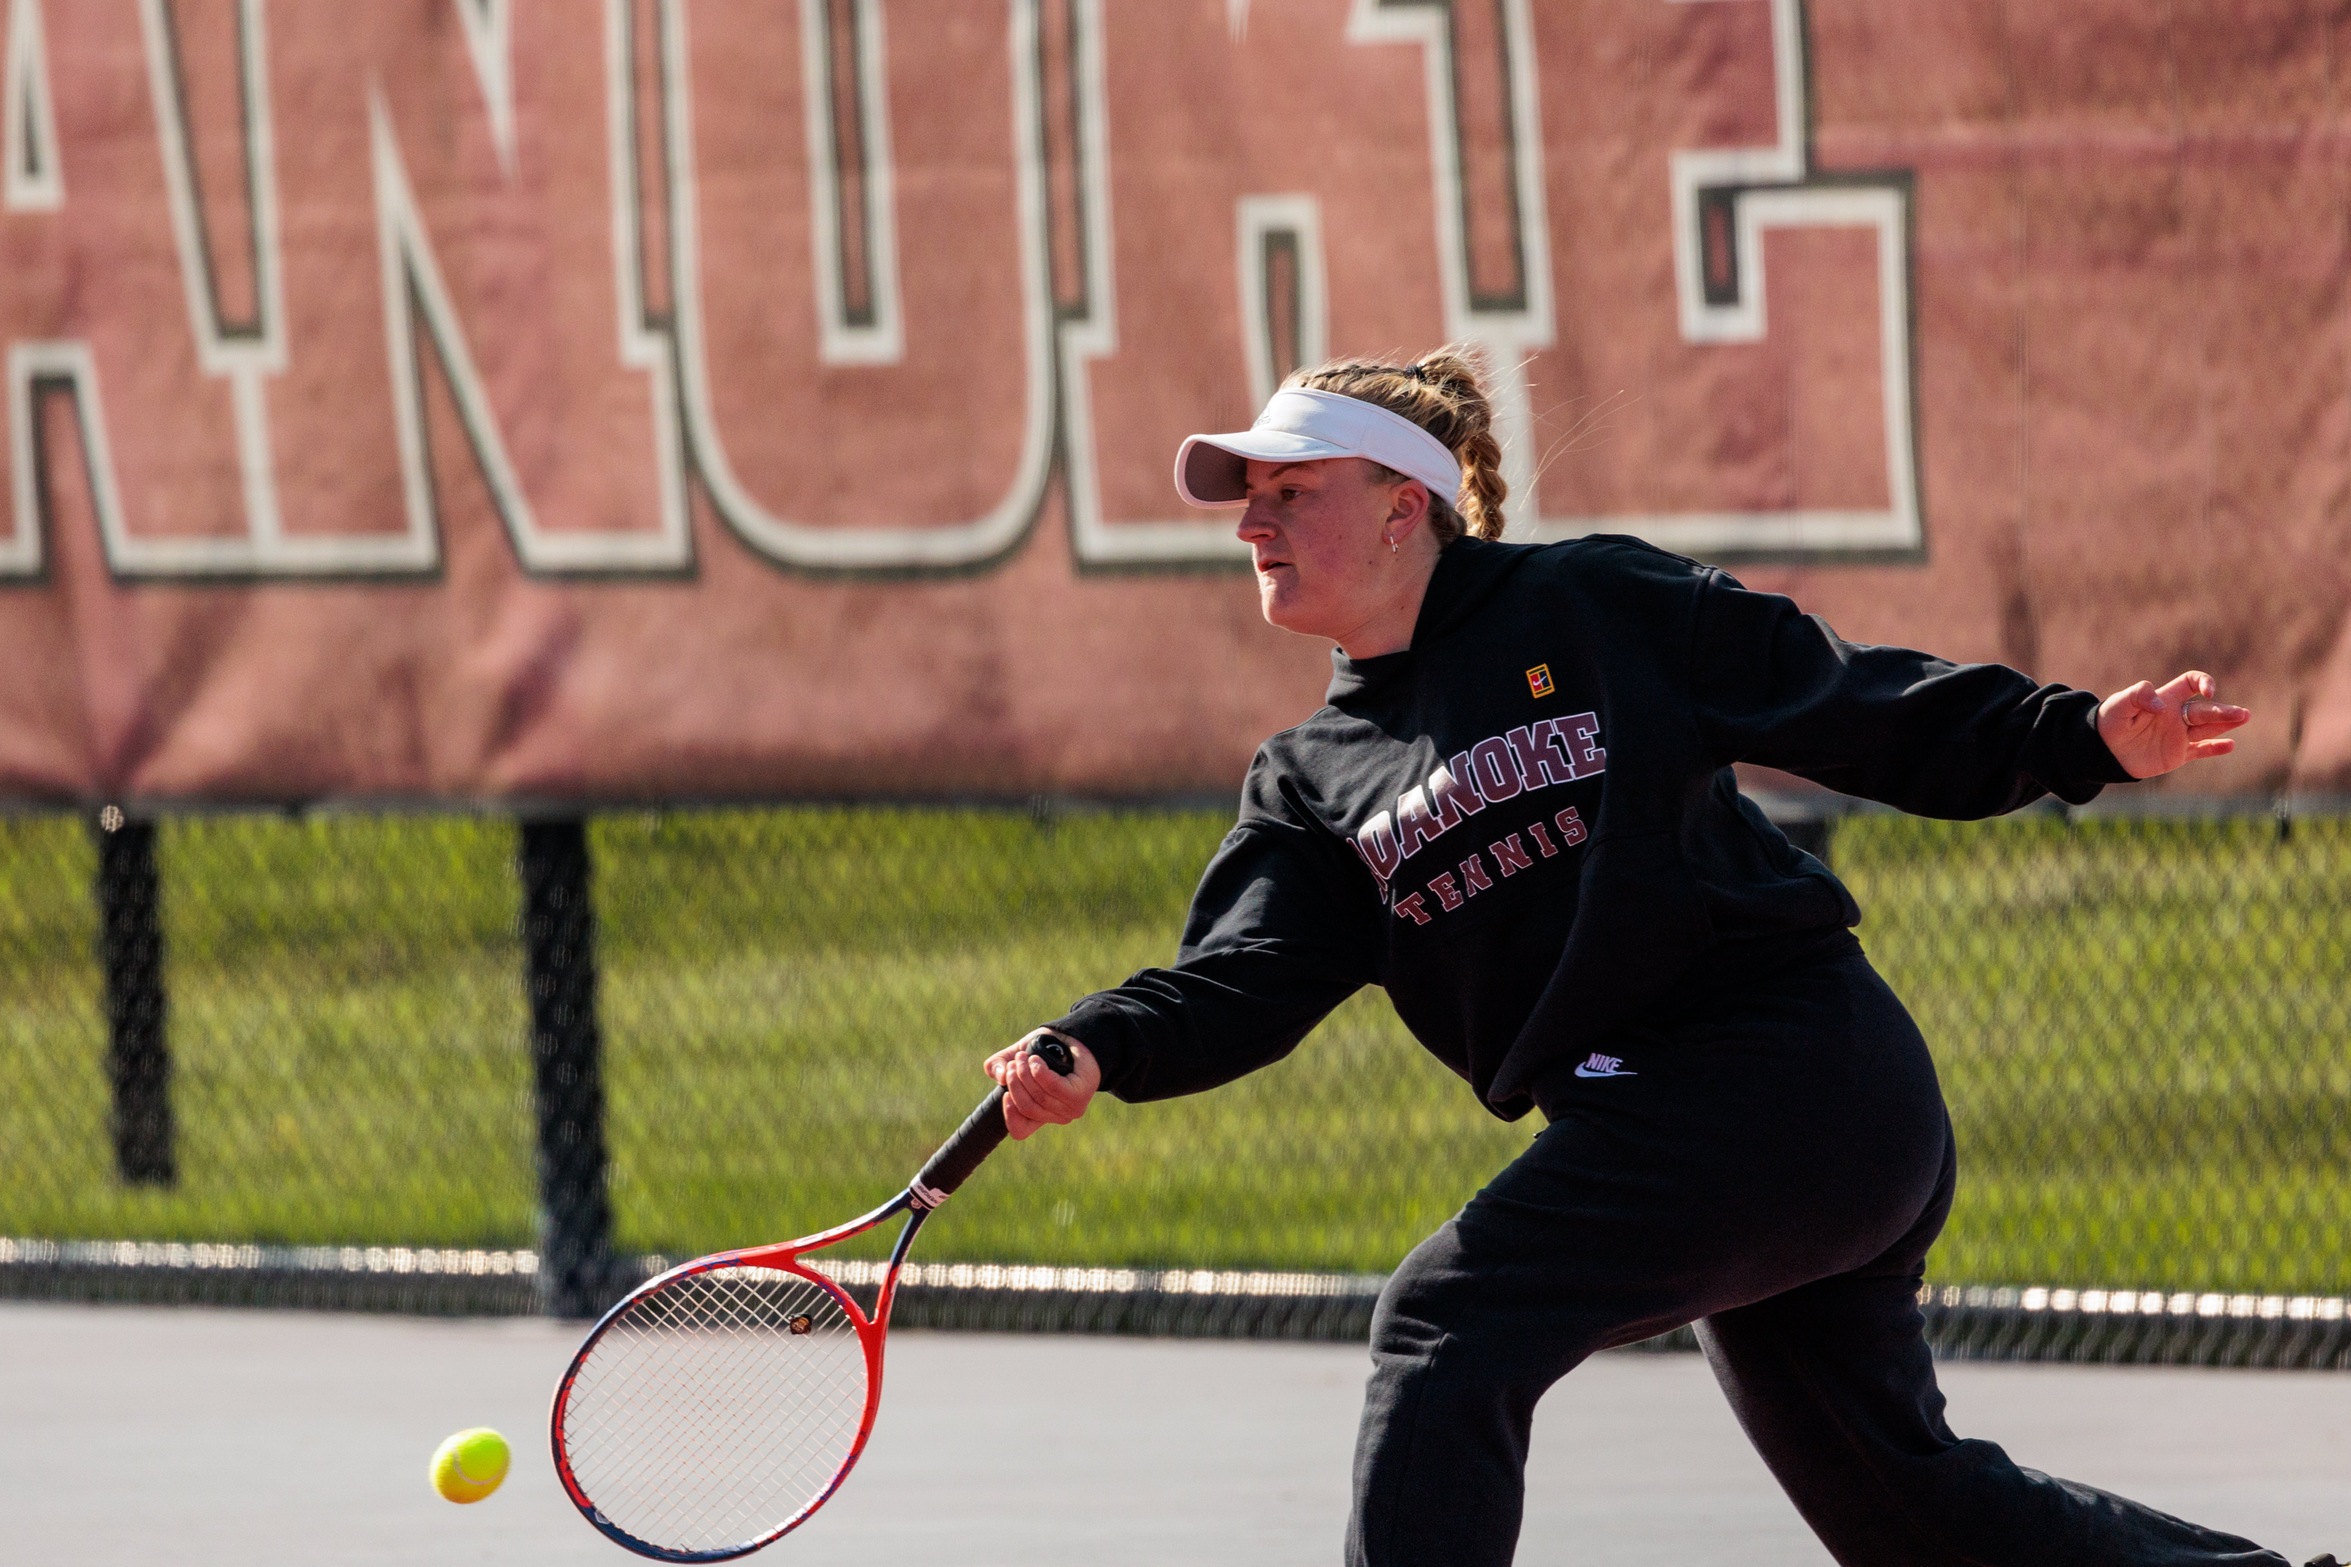 action photo of RC women's tennis player